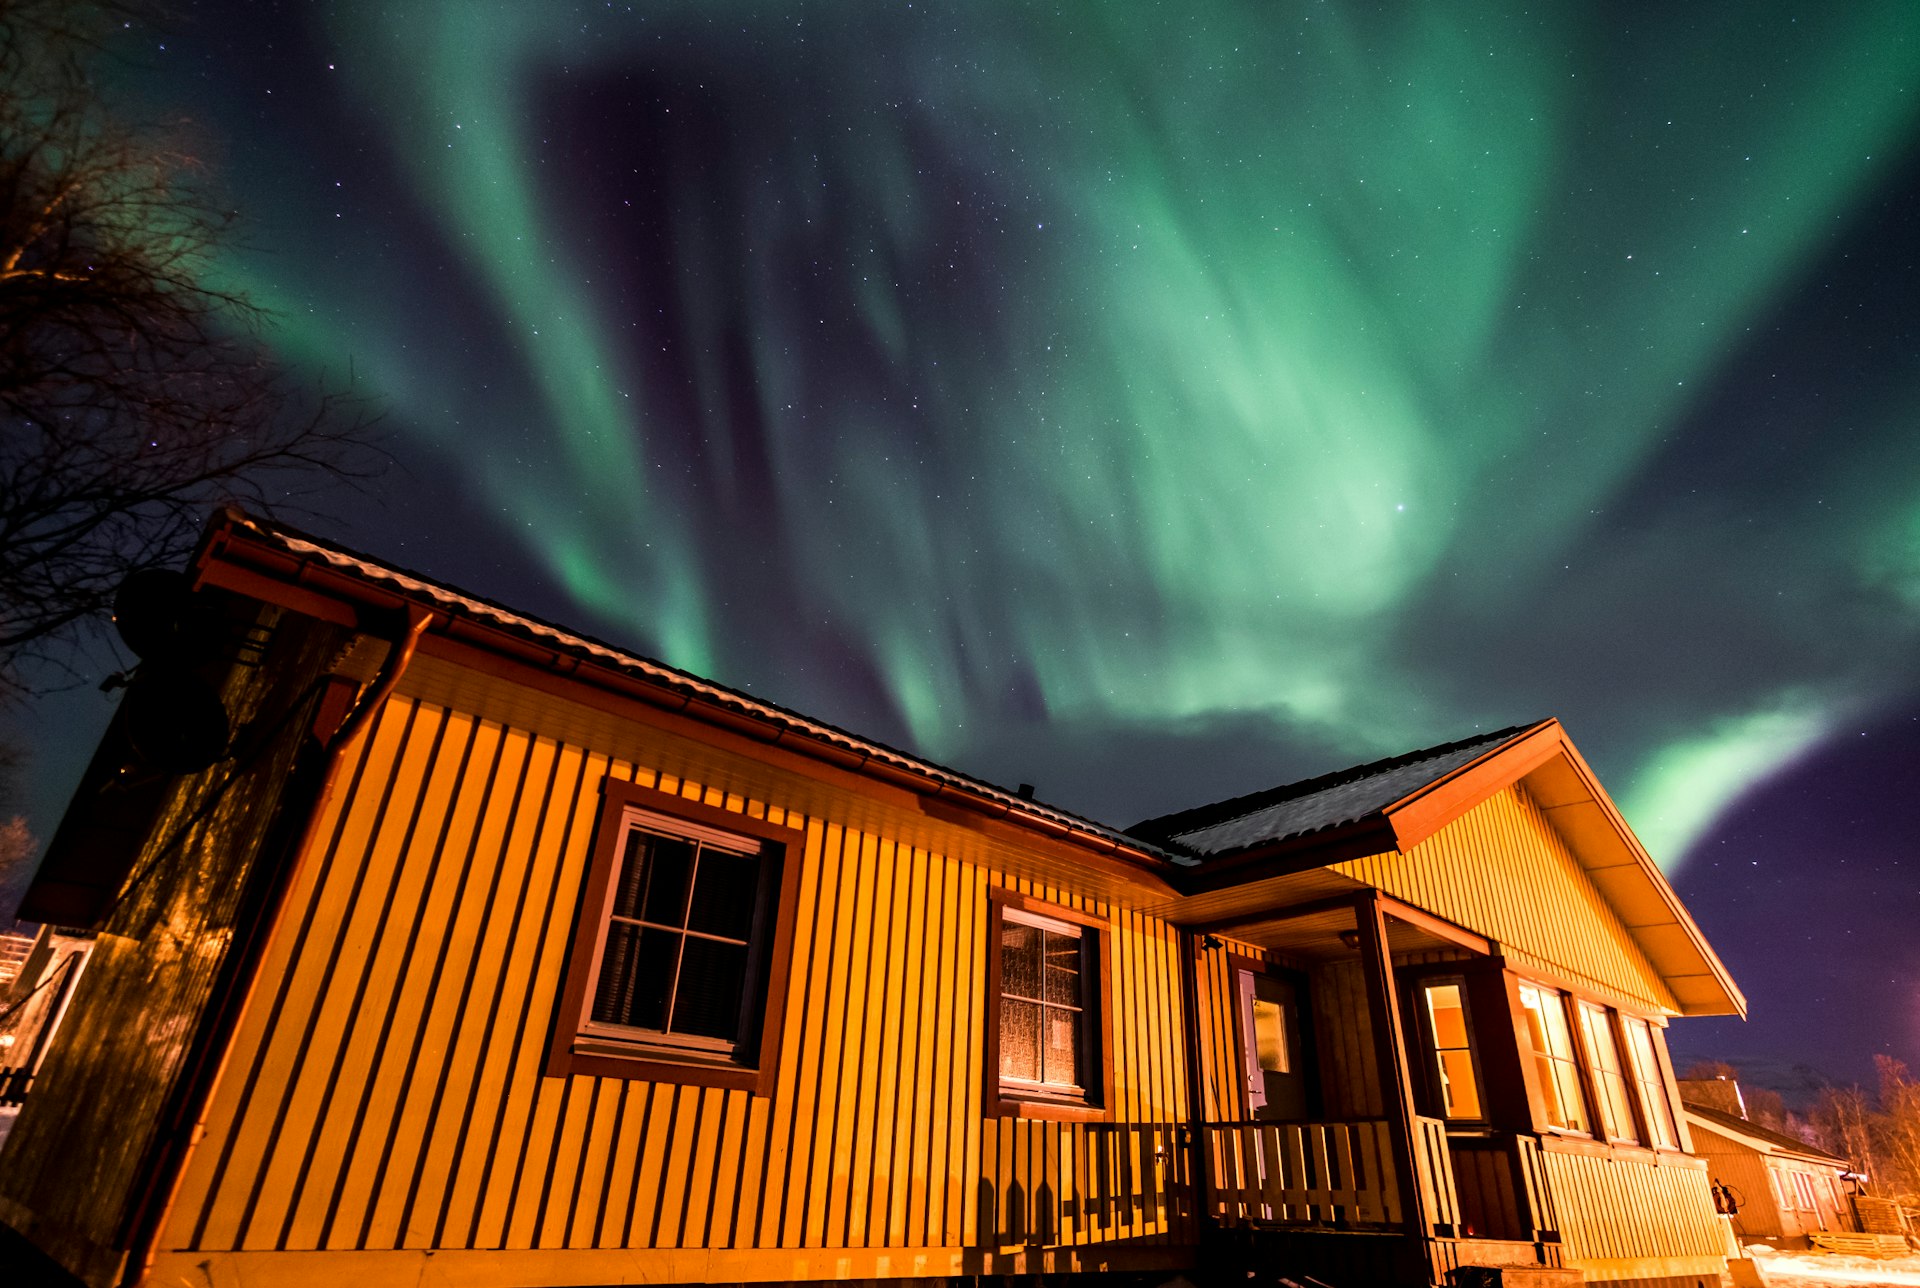 A wooden house with the Northern Lights above it